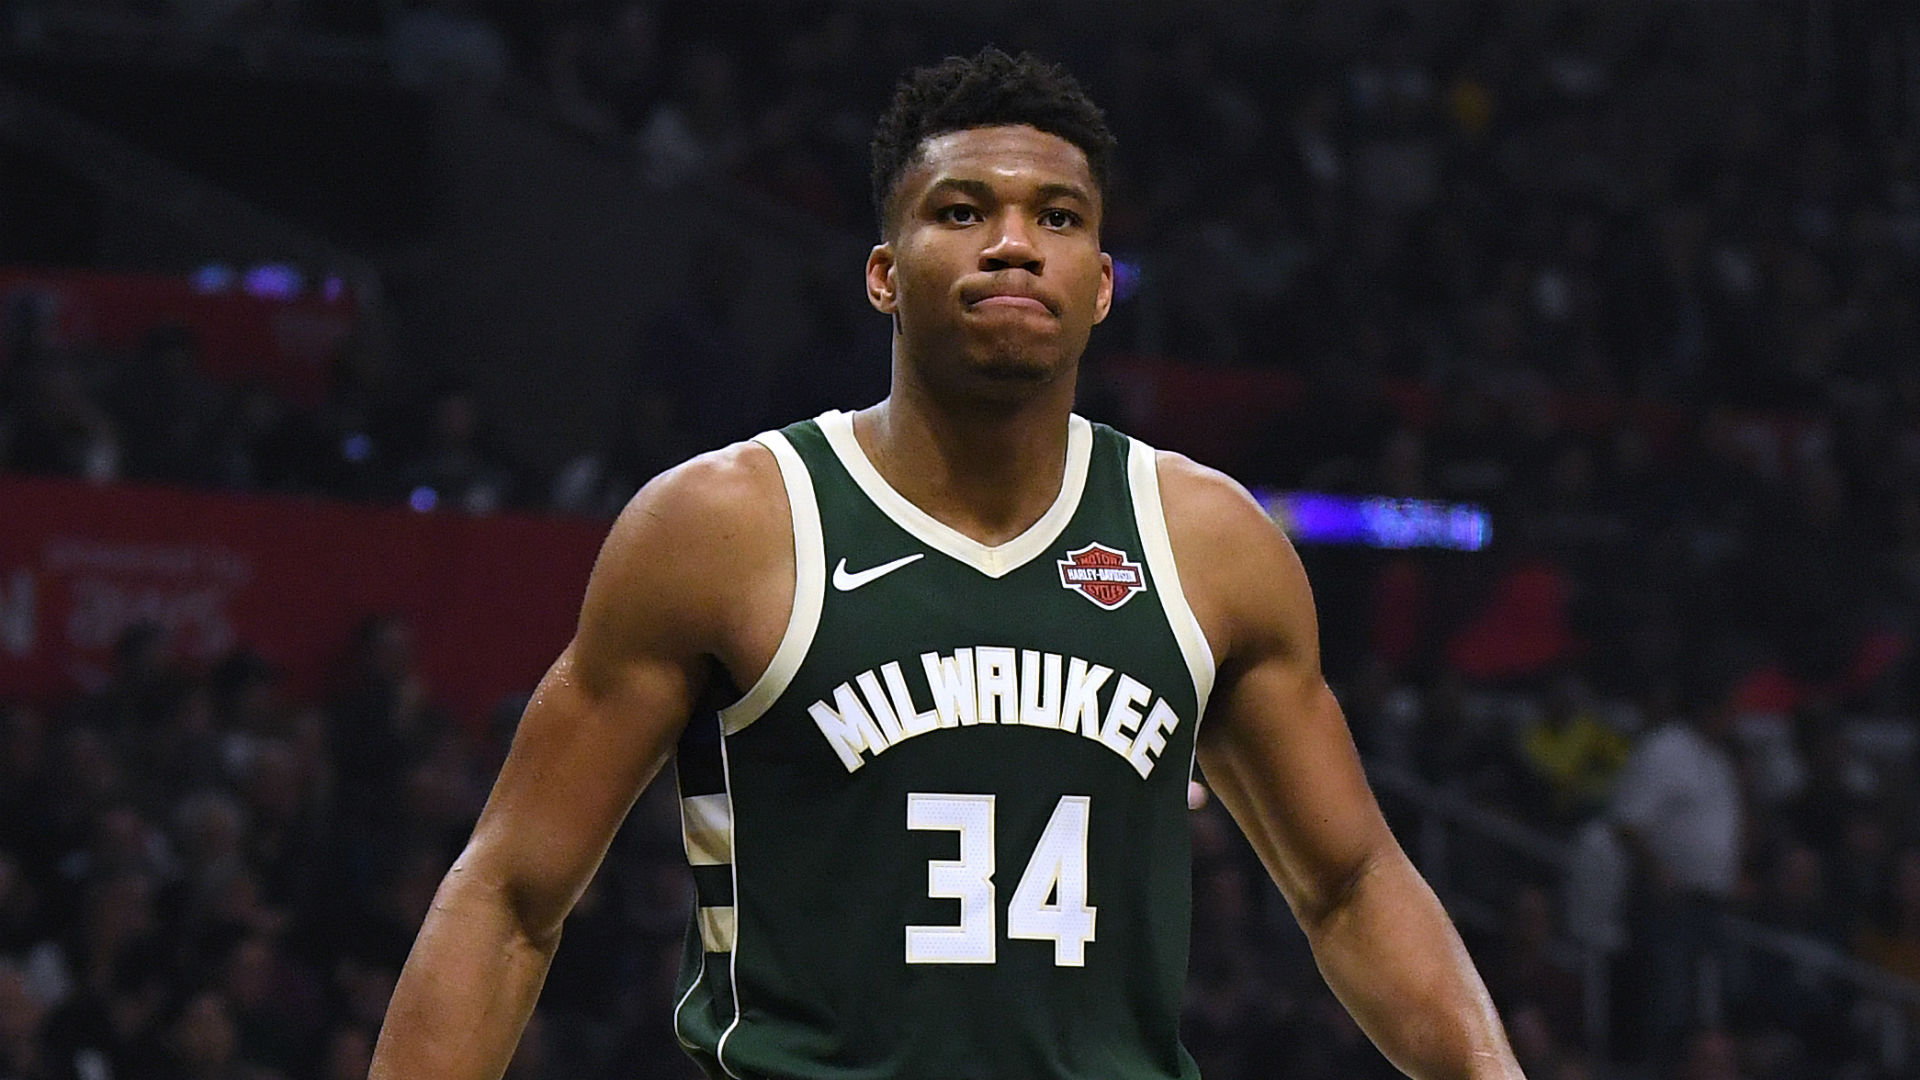 A loss of focus is not an issue Giannis Antetokounmpo anticipates for the Milwaukee Bucks despite matching the franchise's best NBA start.